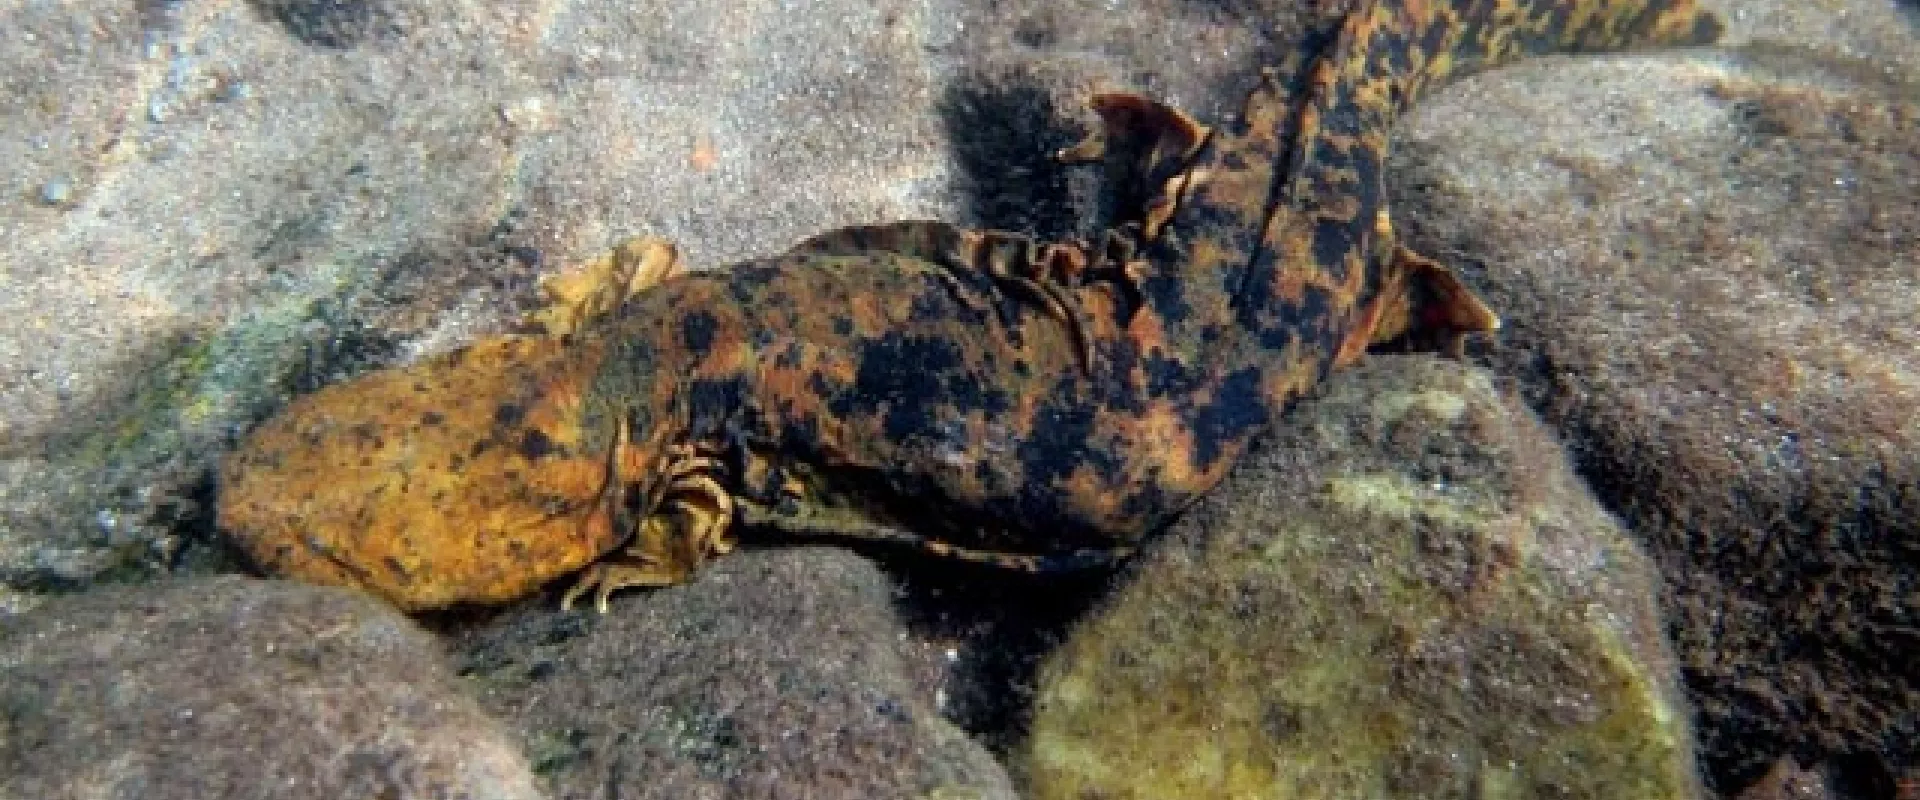 Providing a Safe Home for One of North America’s Largest Salamanders